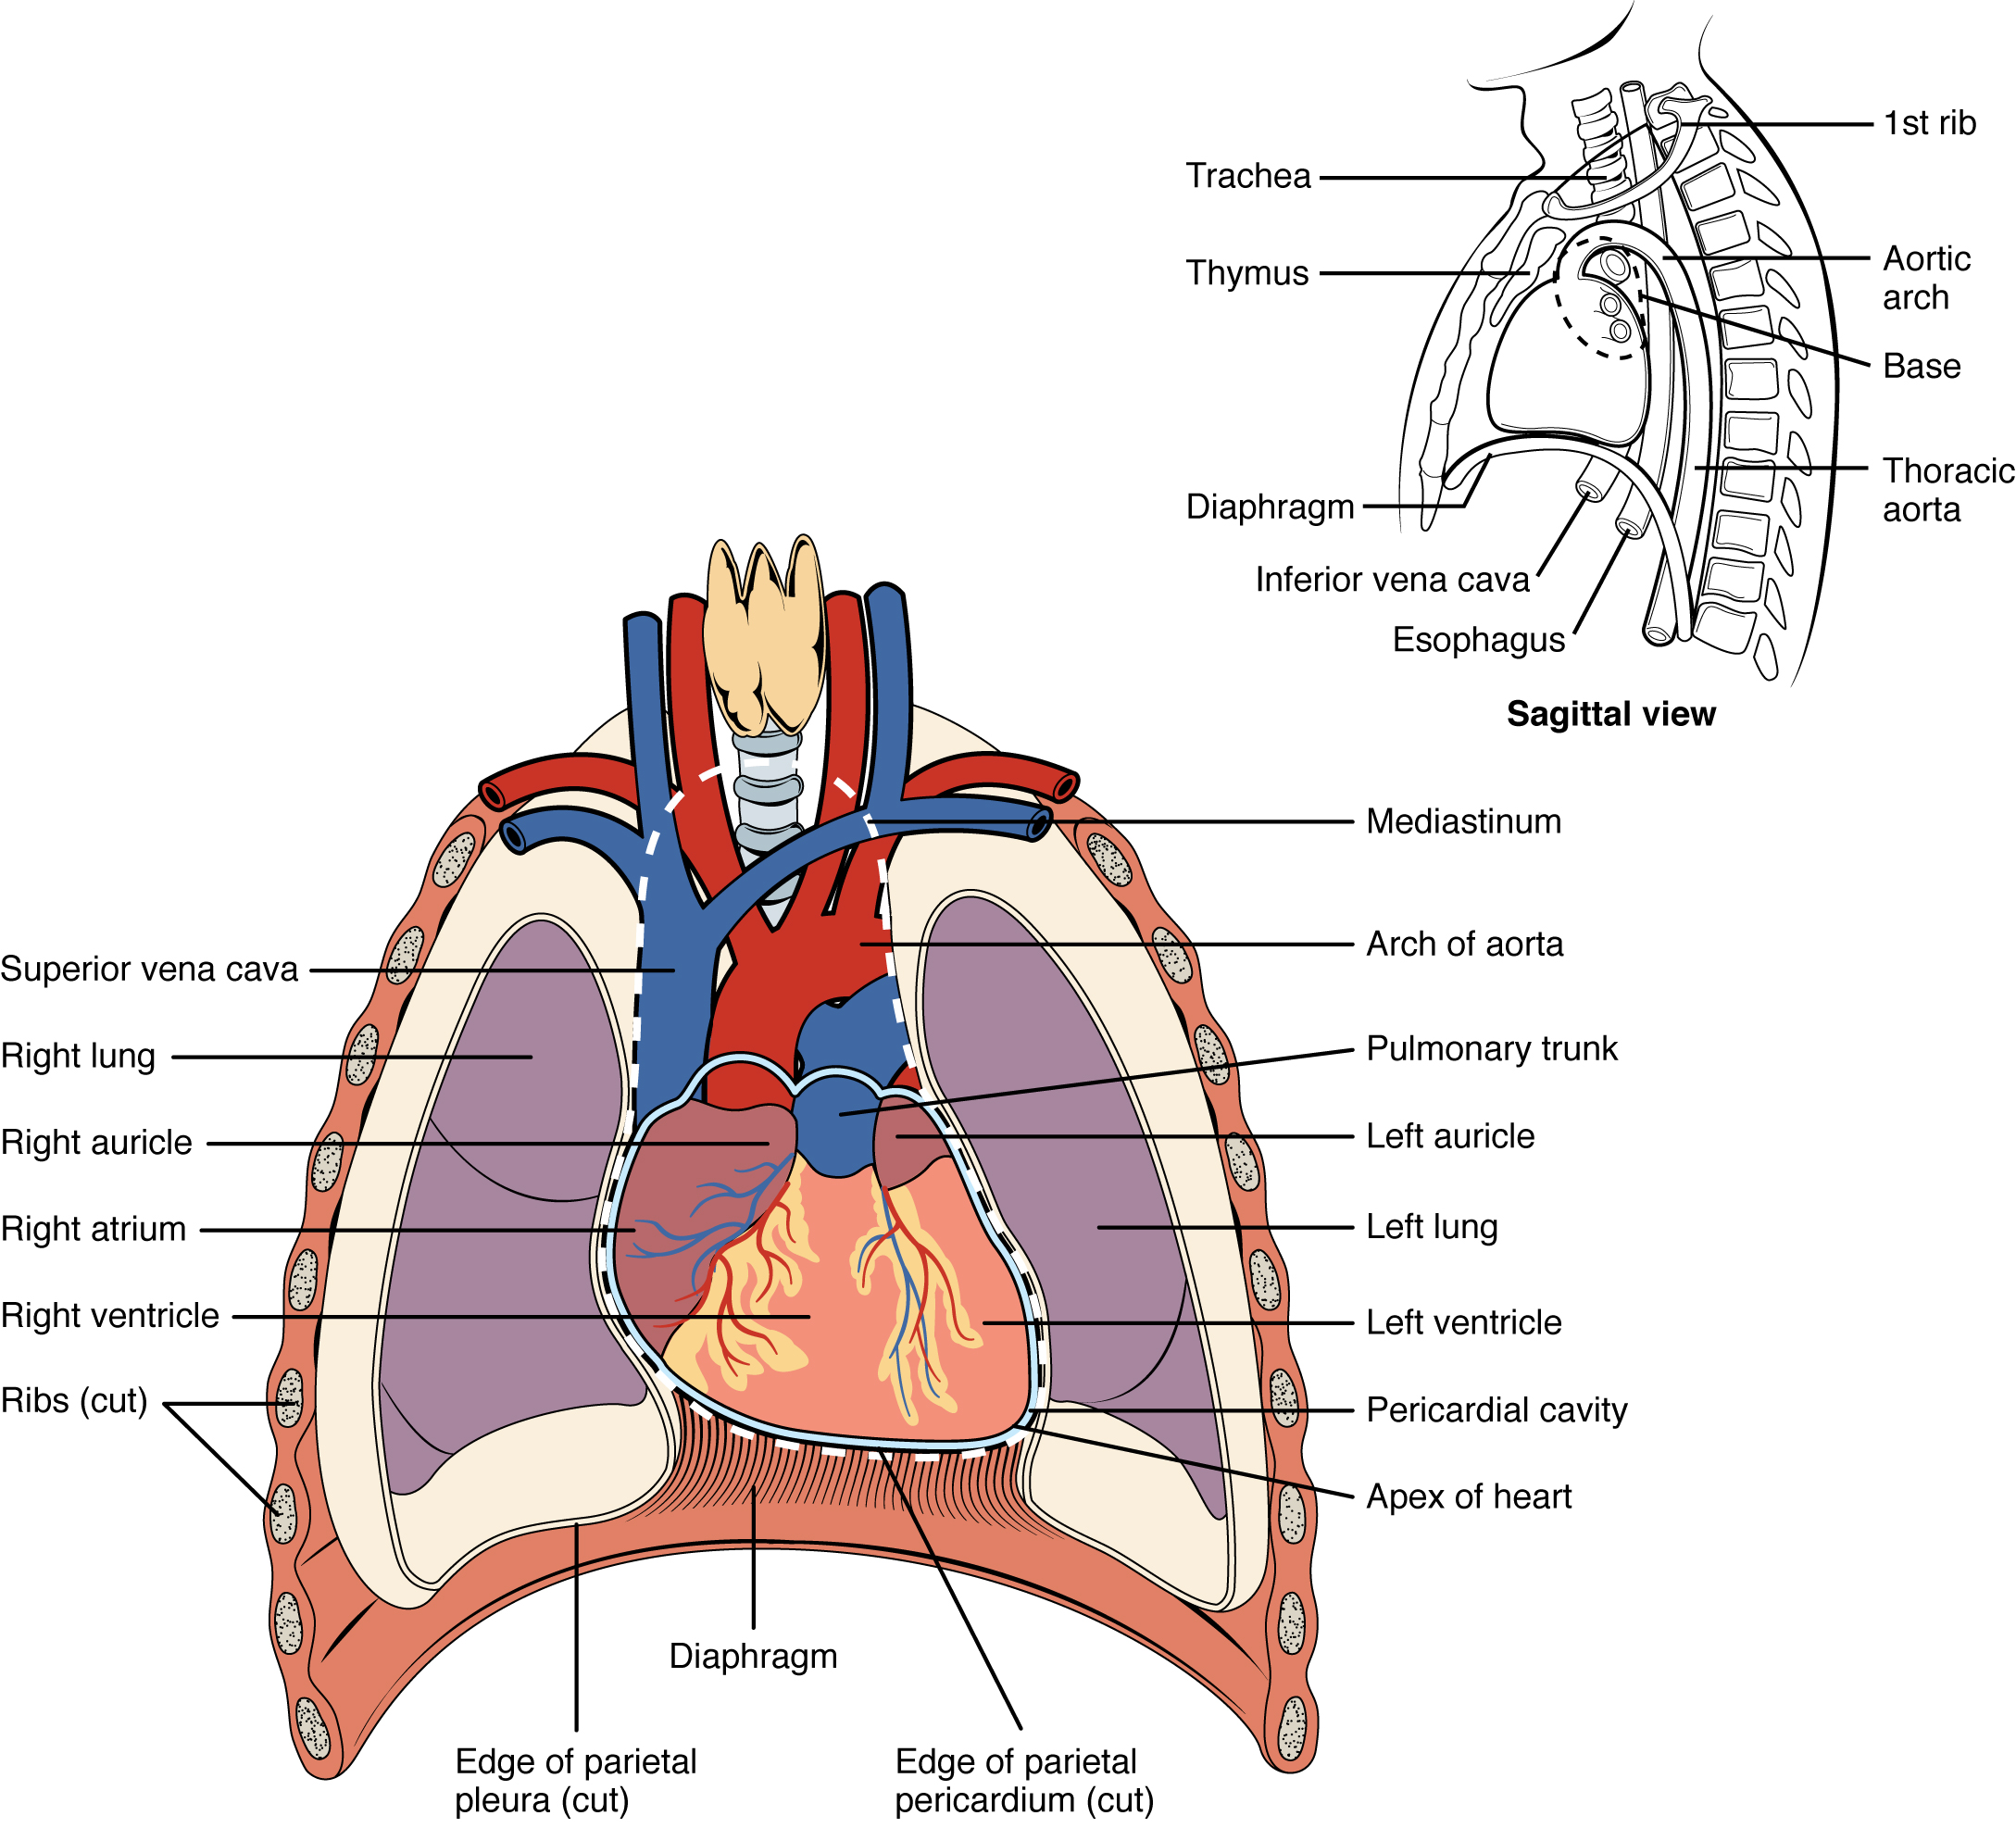 The heart is positioned between the lungs at the center of the thoracic cavity in a space called the mediastinum.